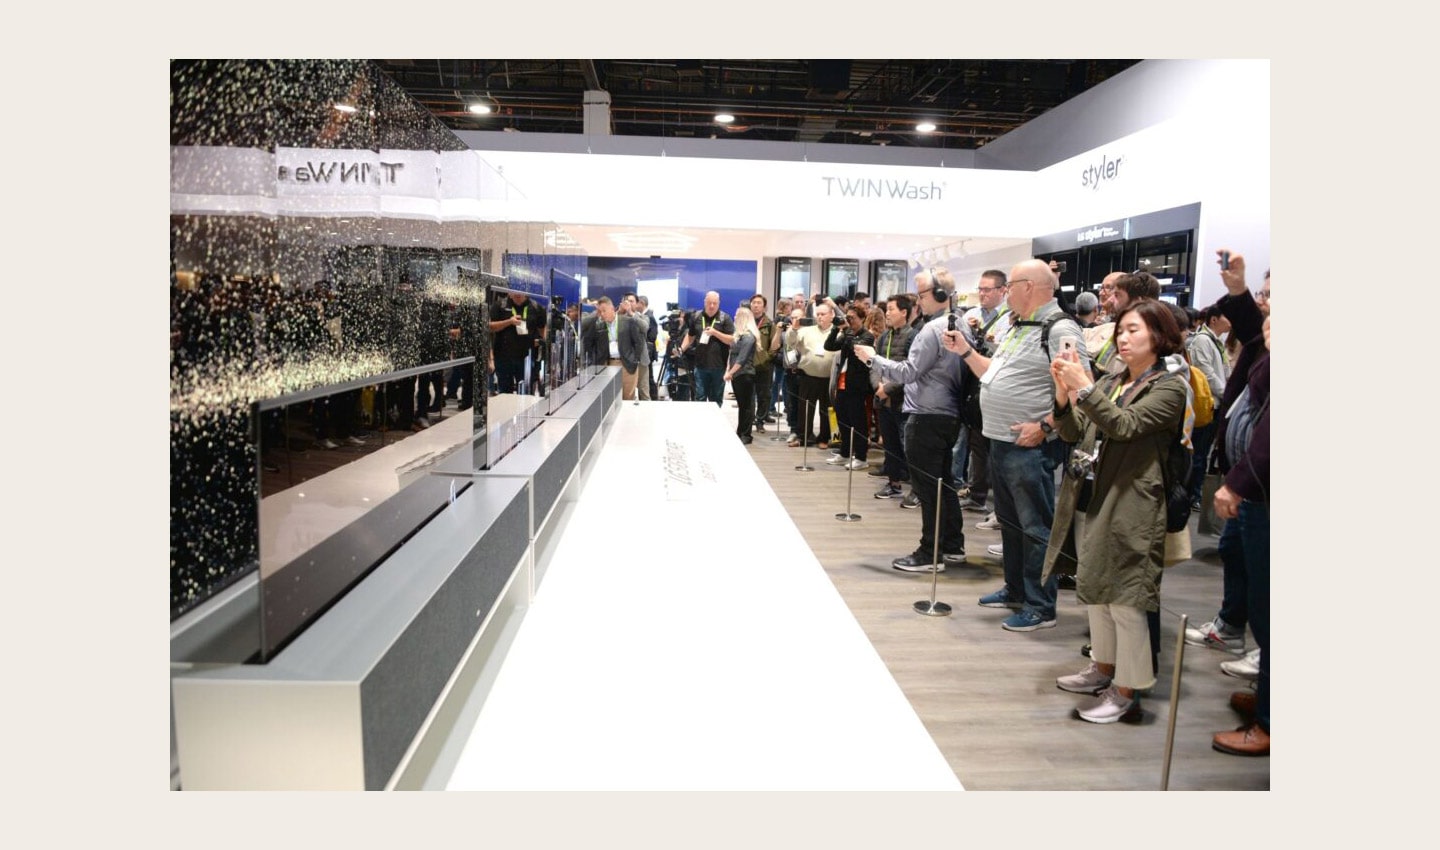 Side view of LG SIGNATURE OLED TVR display zone with CES visitors viewing the display and taking pictures